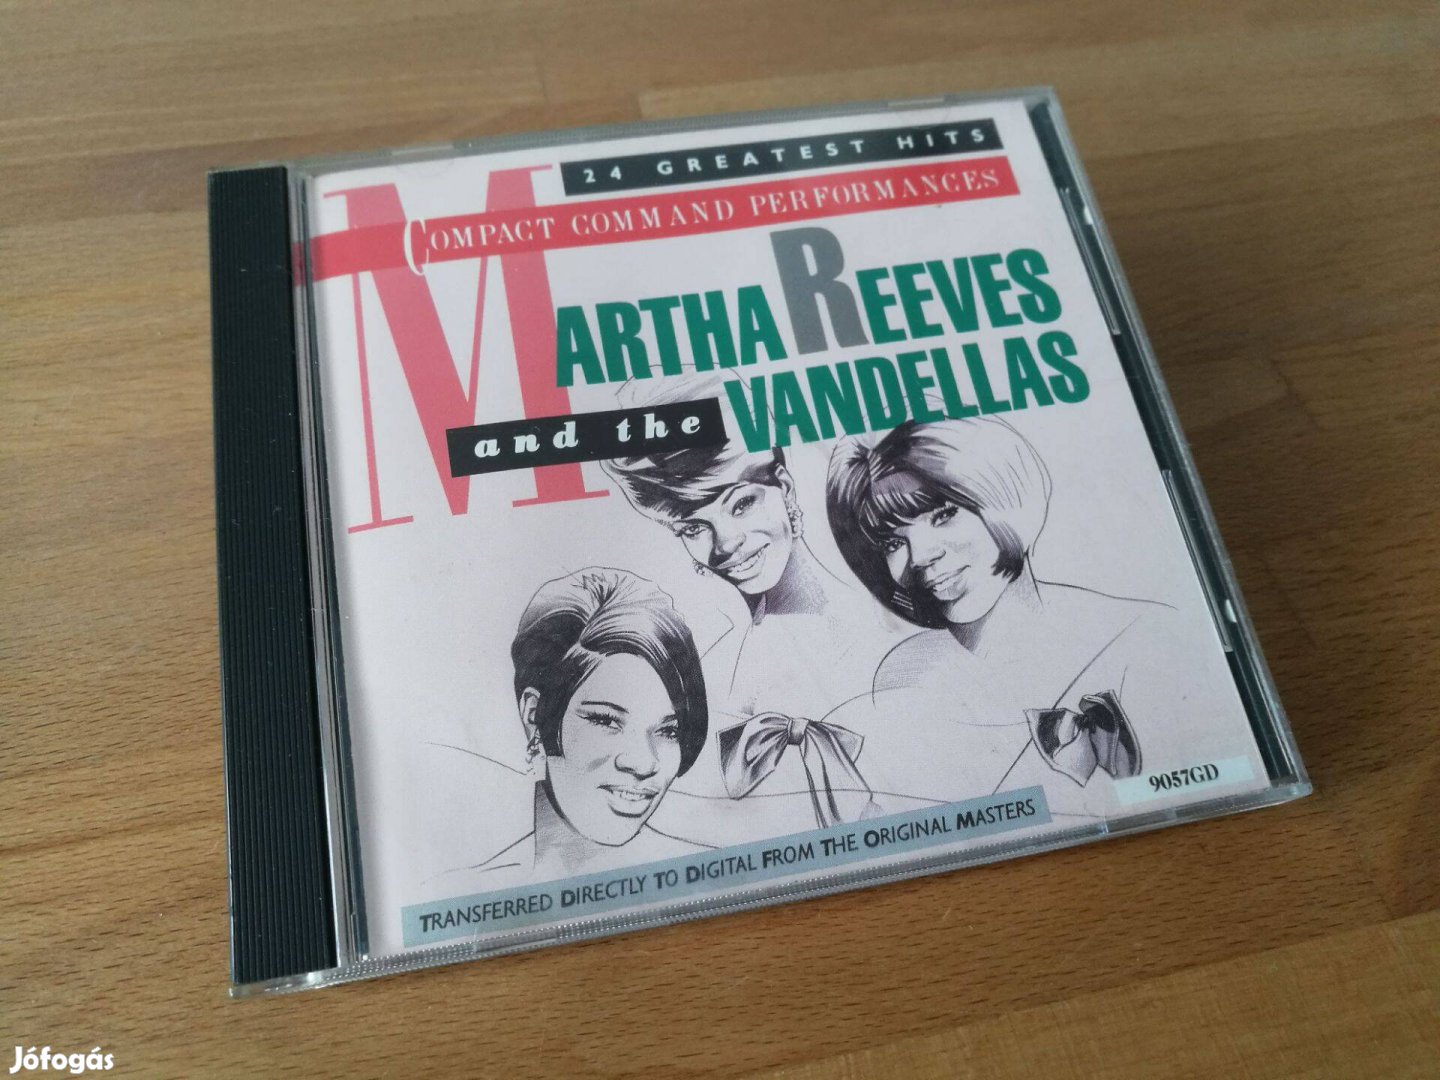 Martha Reeves And The Vandellas - 24 greatest hits (Motown, USA, 1986)